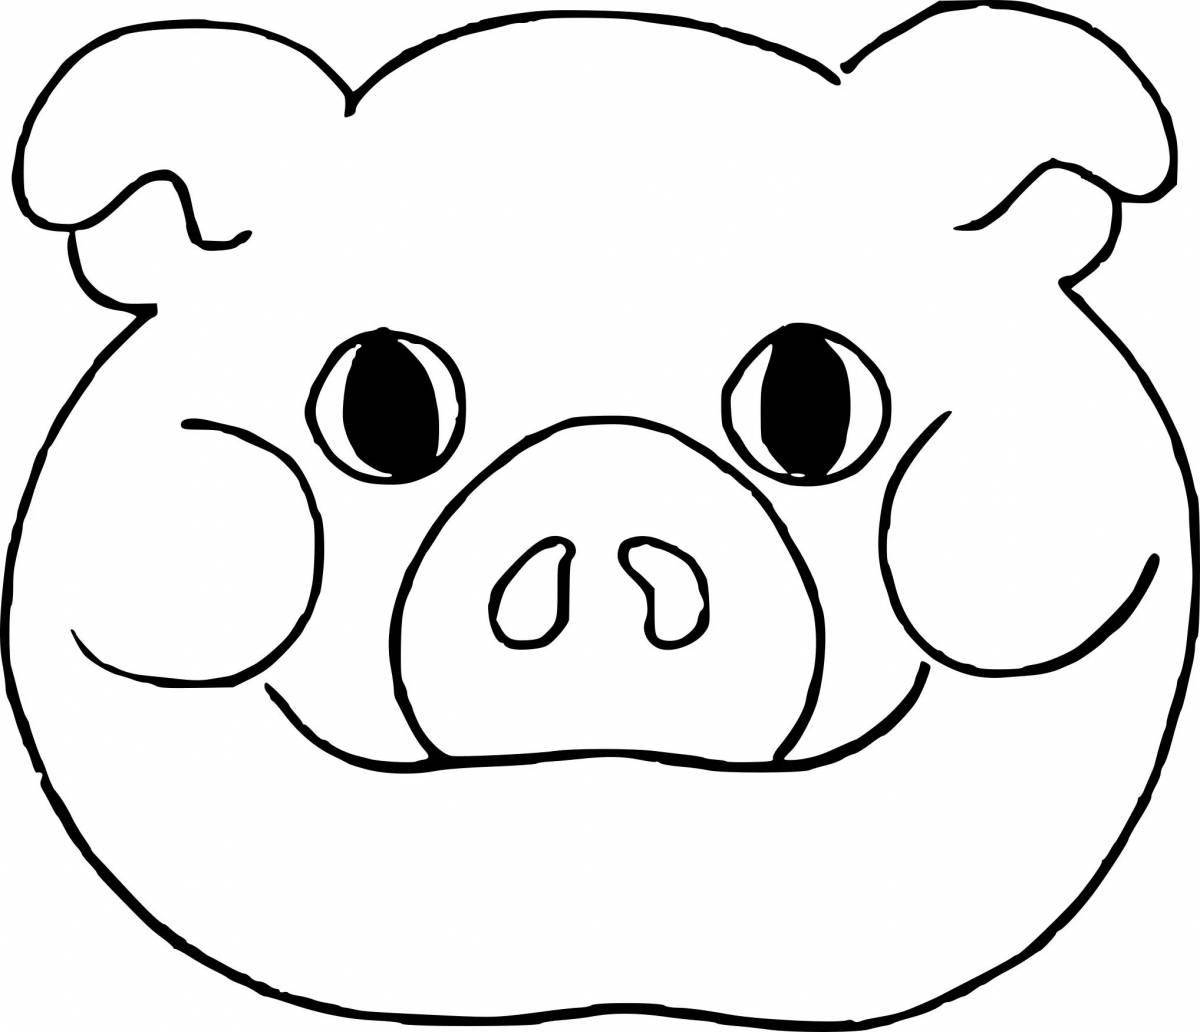 Funny animals coloring page